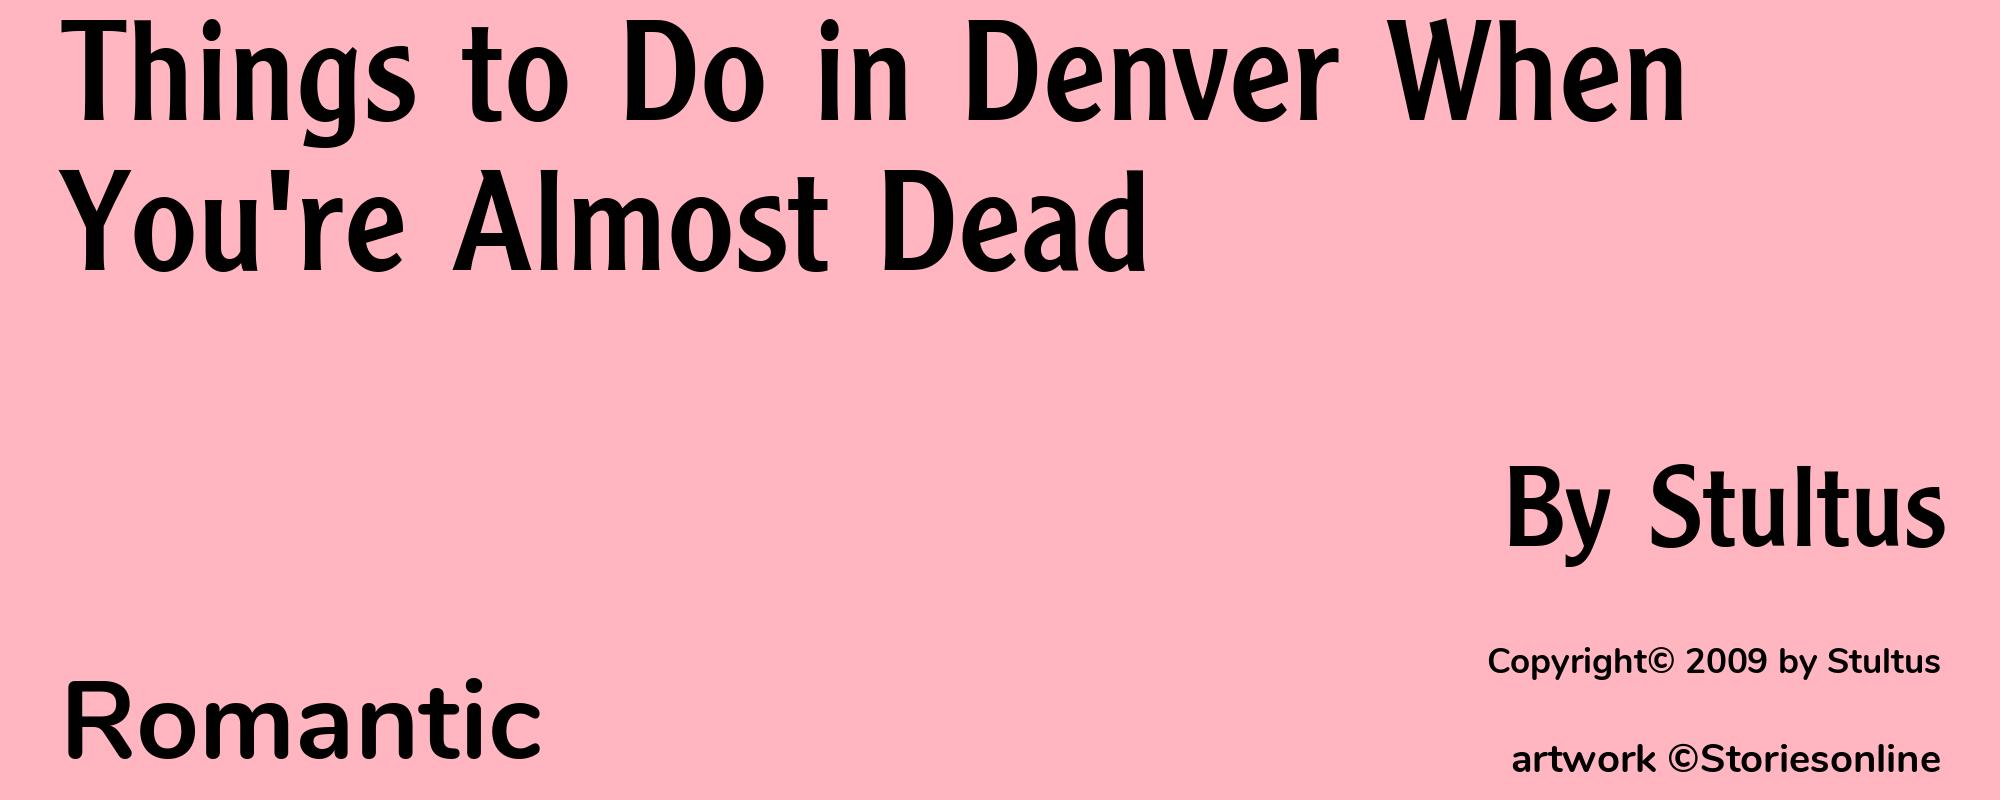 Things to Do in Denver When You're Almost Dead - Cover